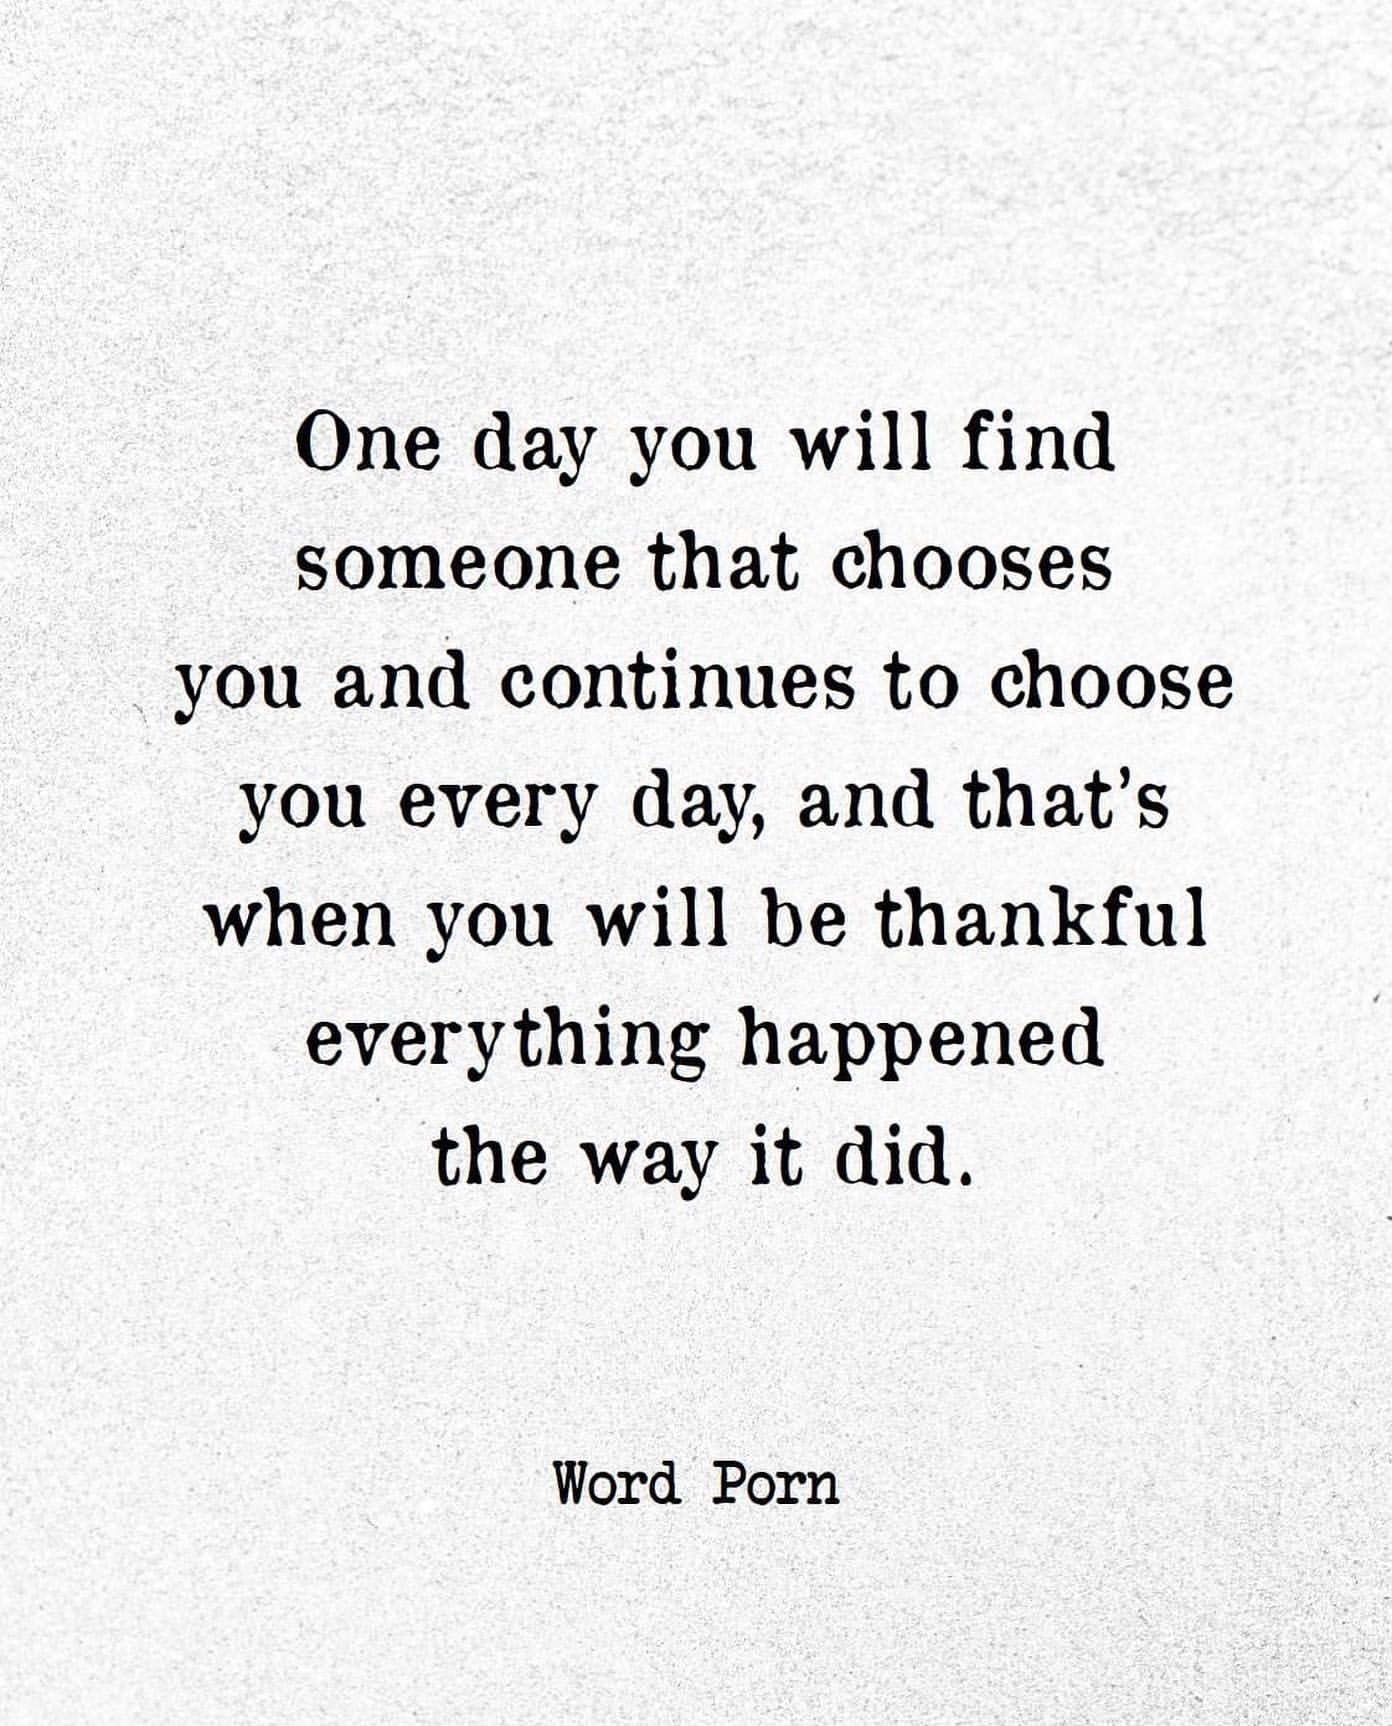 One day you will find someone that chooses you and continues to choose you every day, and that's when you will be thankful everything happened the way it did.